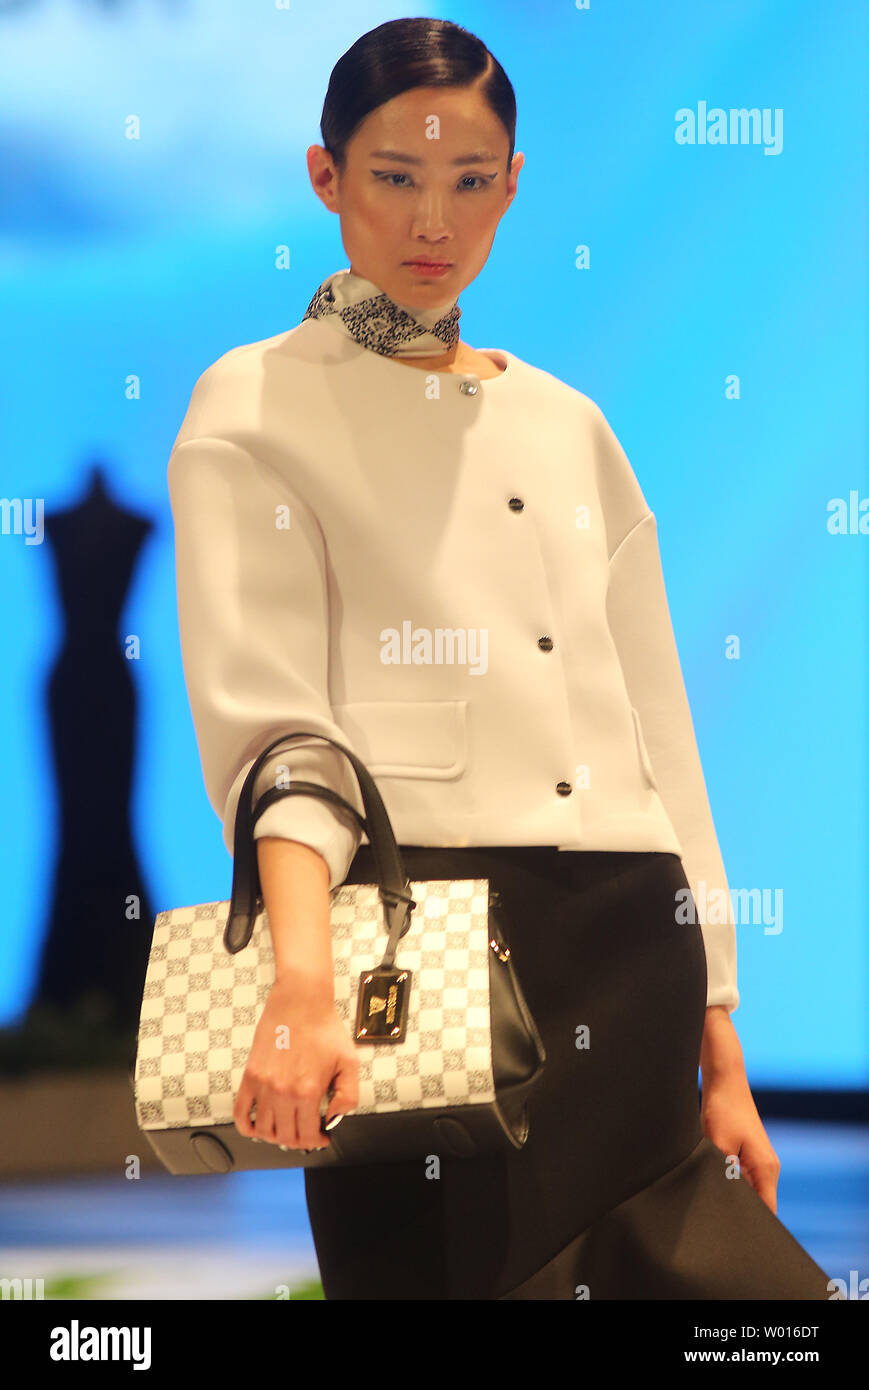 Chinese models wear clothing from the 2015 White Collar Collection during the annual China Fashion Week in Beijing on November 2, 2014.  Over 70 domestic and international fashion brands will showcase their new collections in what has become an internationally recognized platform for new designers.       UPI/Stephen Shaver Stock Photo